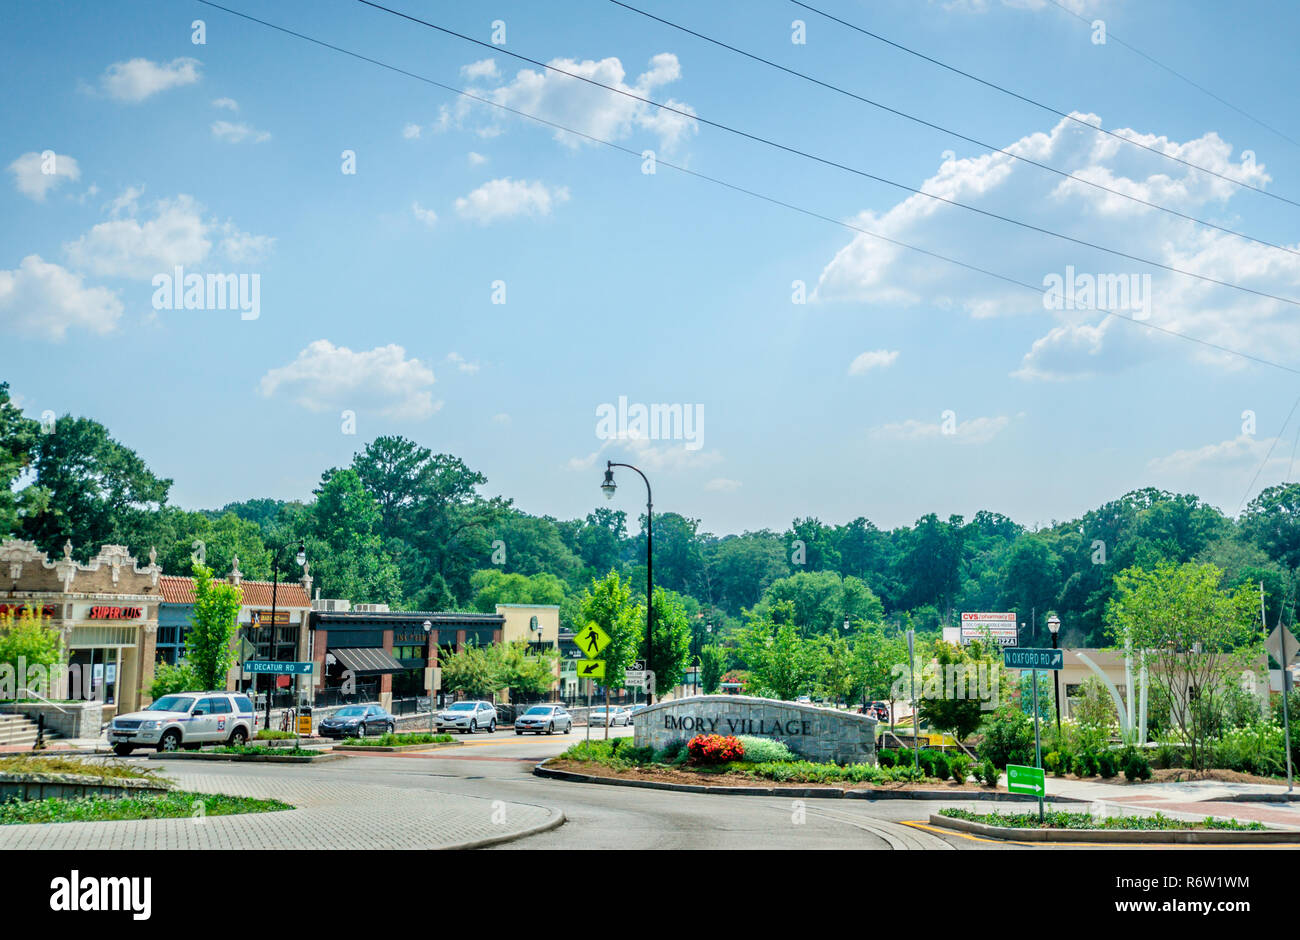 A sign welcomes visitors to Emory Village, a commercial district serving nearby Druid Hills and Emory University,  July 7, 2014, in Atlanta, Georgia. Stock Photo